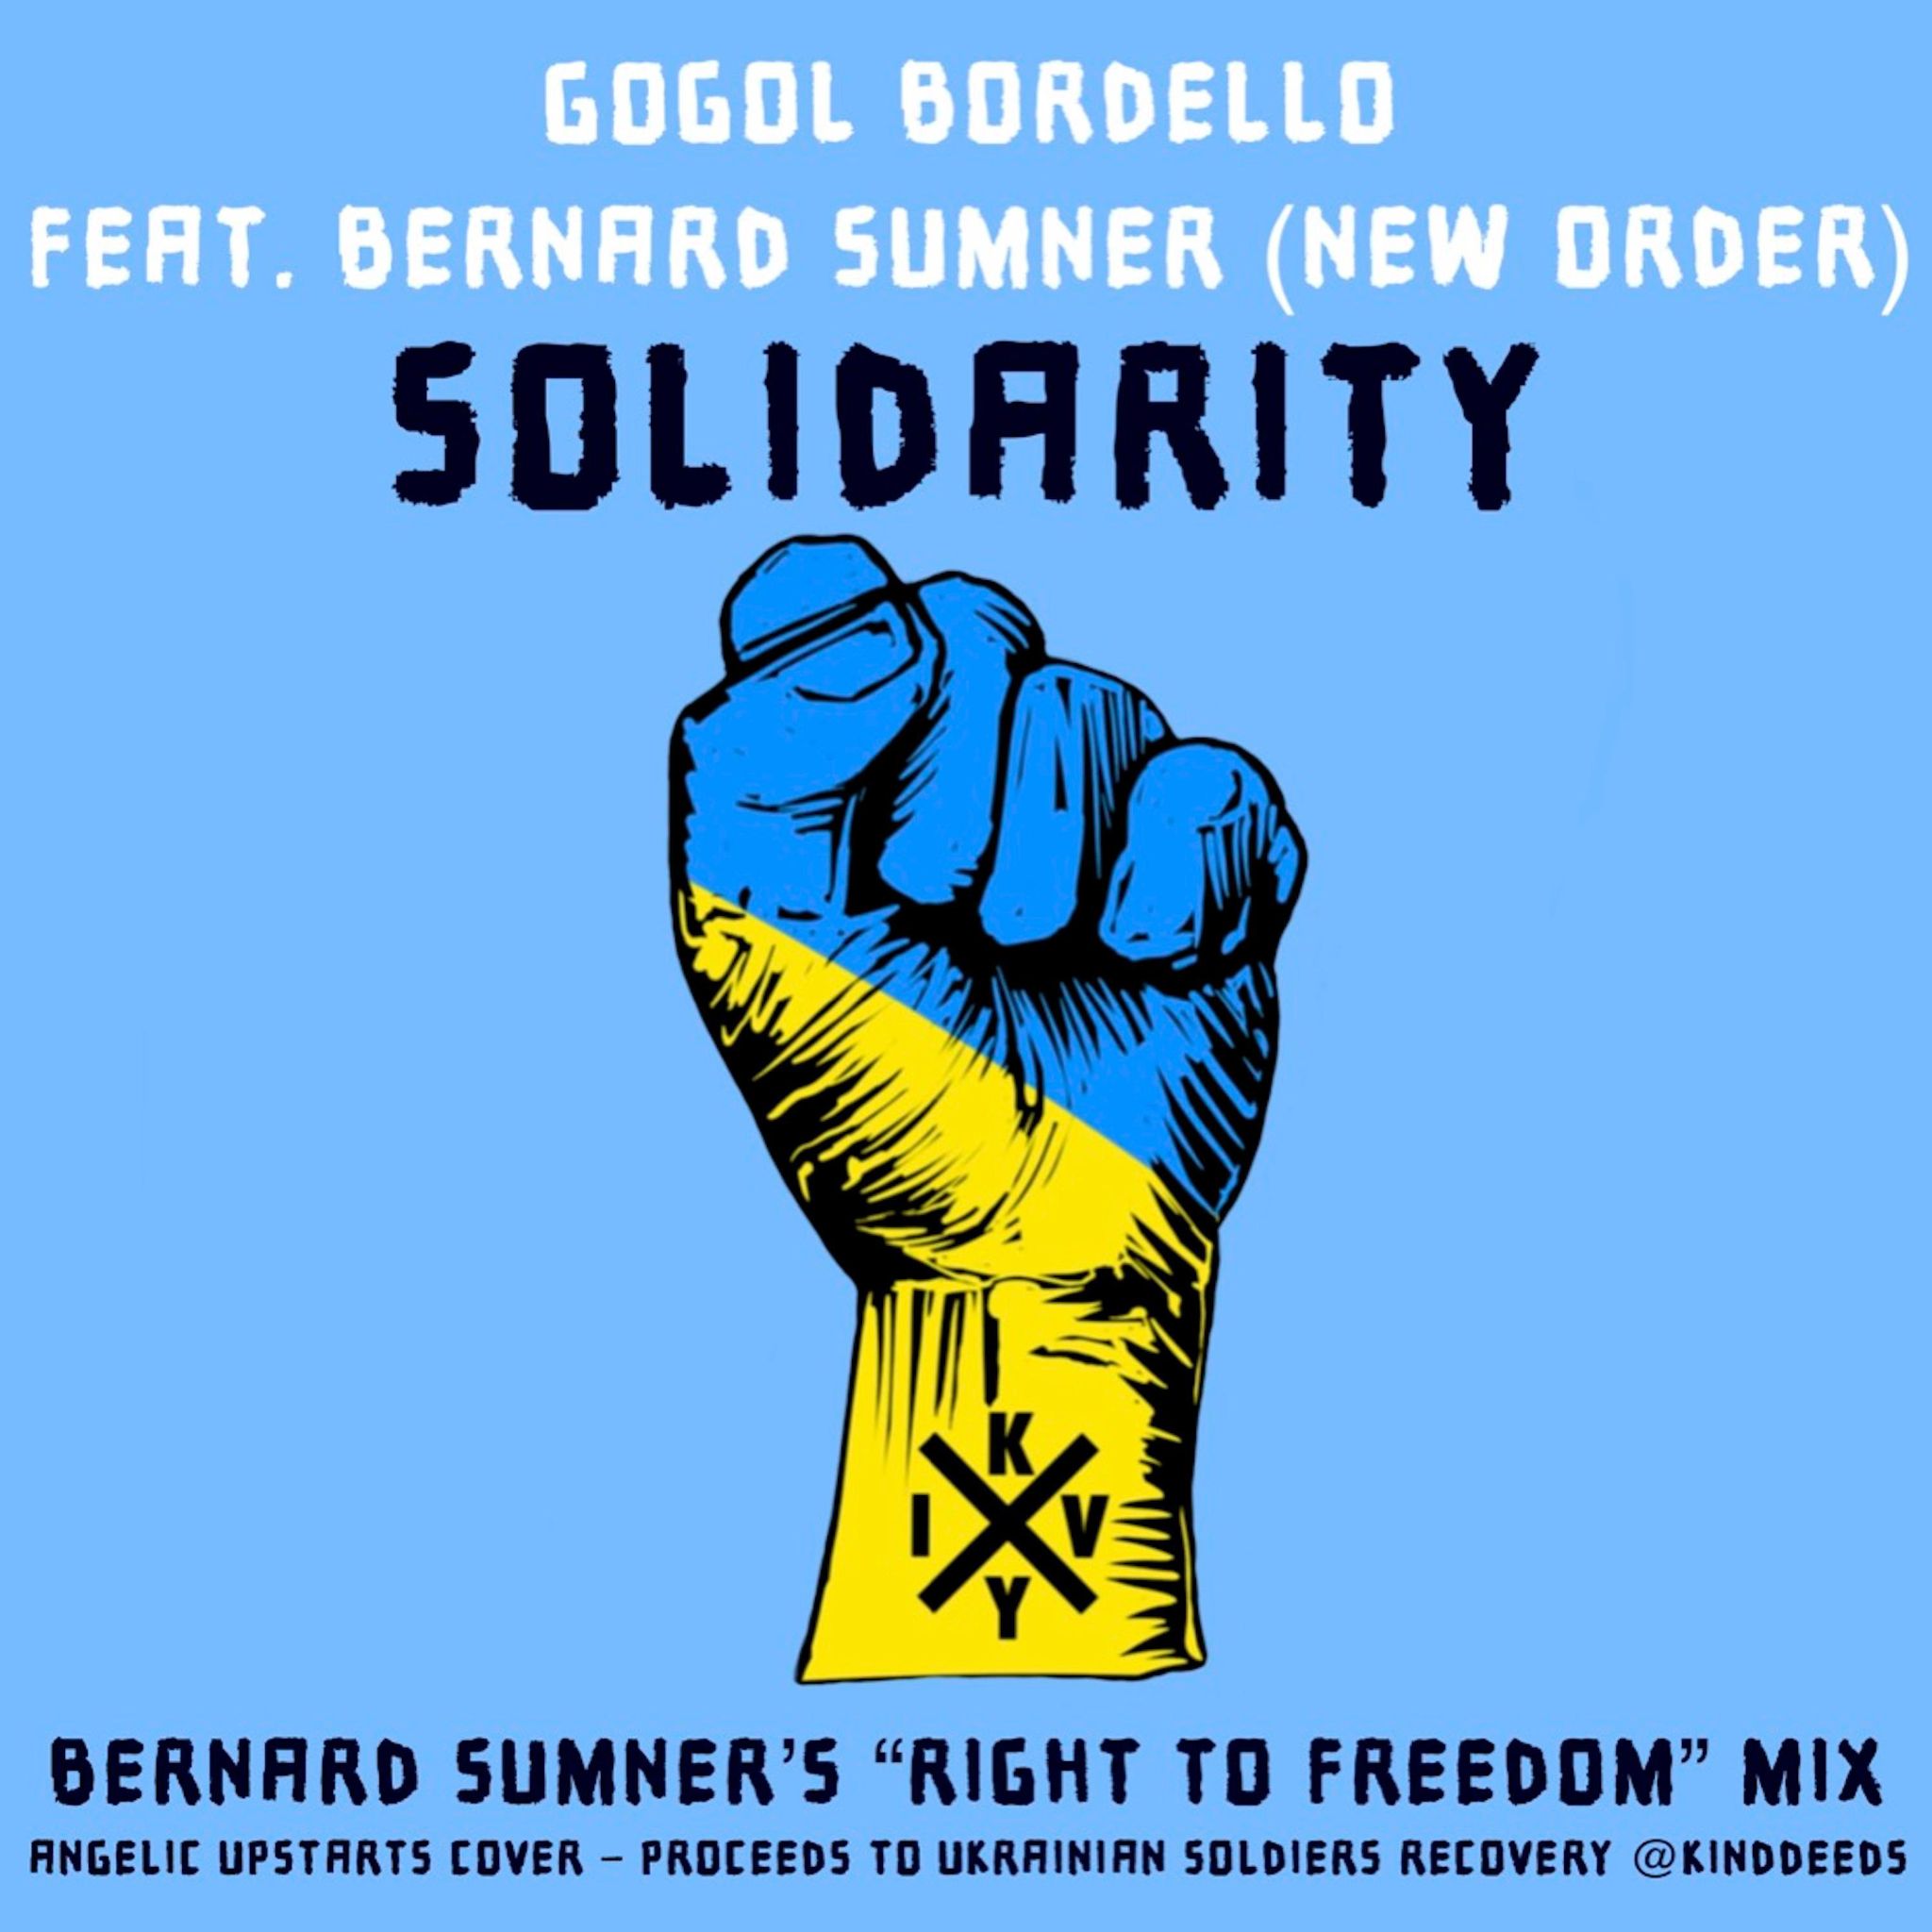 A Musical Tribute to Resilience: Gogol Bordello and Bernard Sumner’s 'Solidarity' for Ukraine